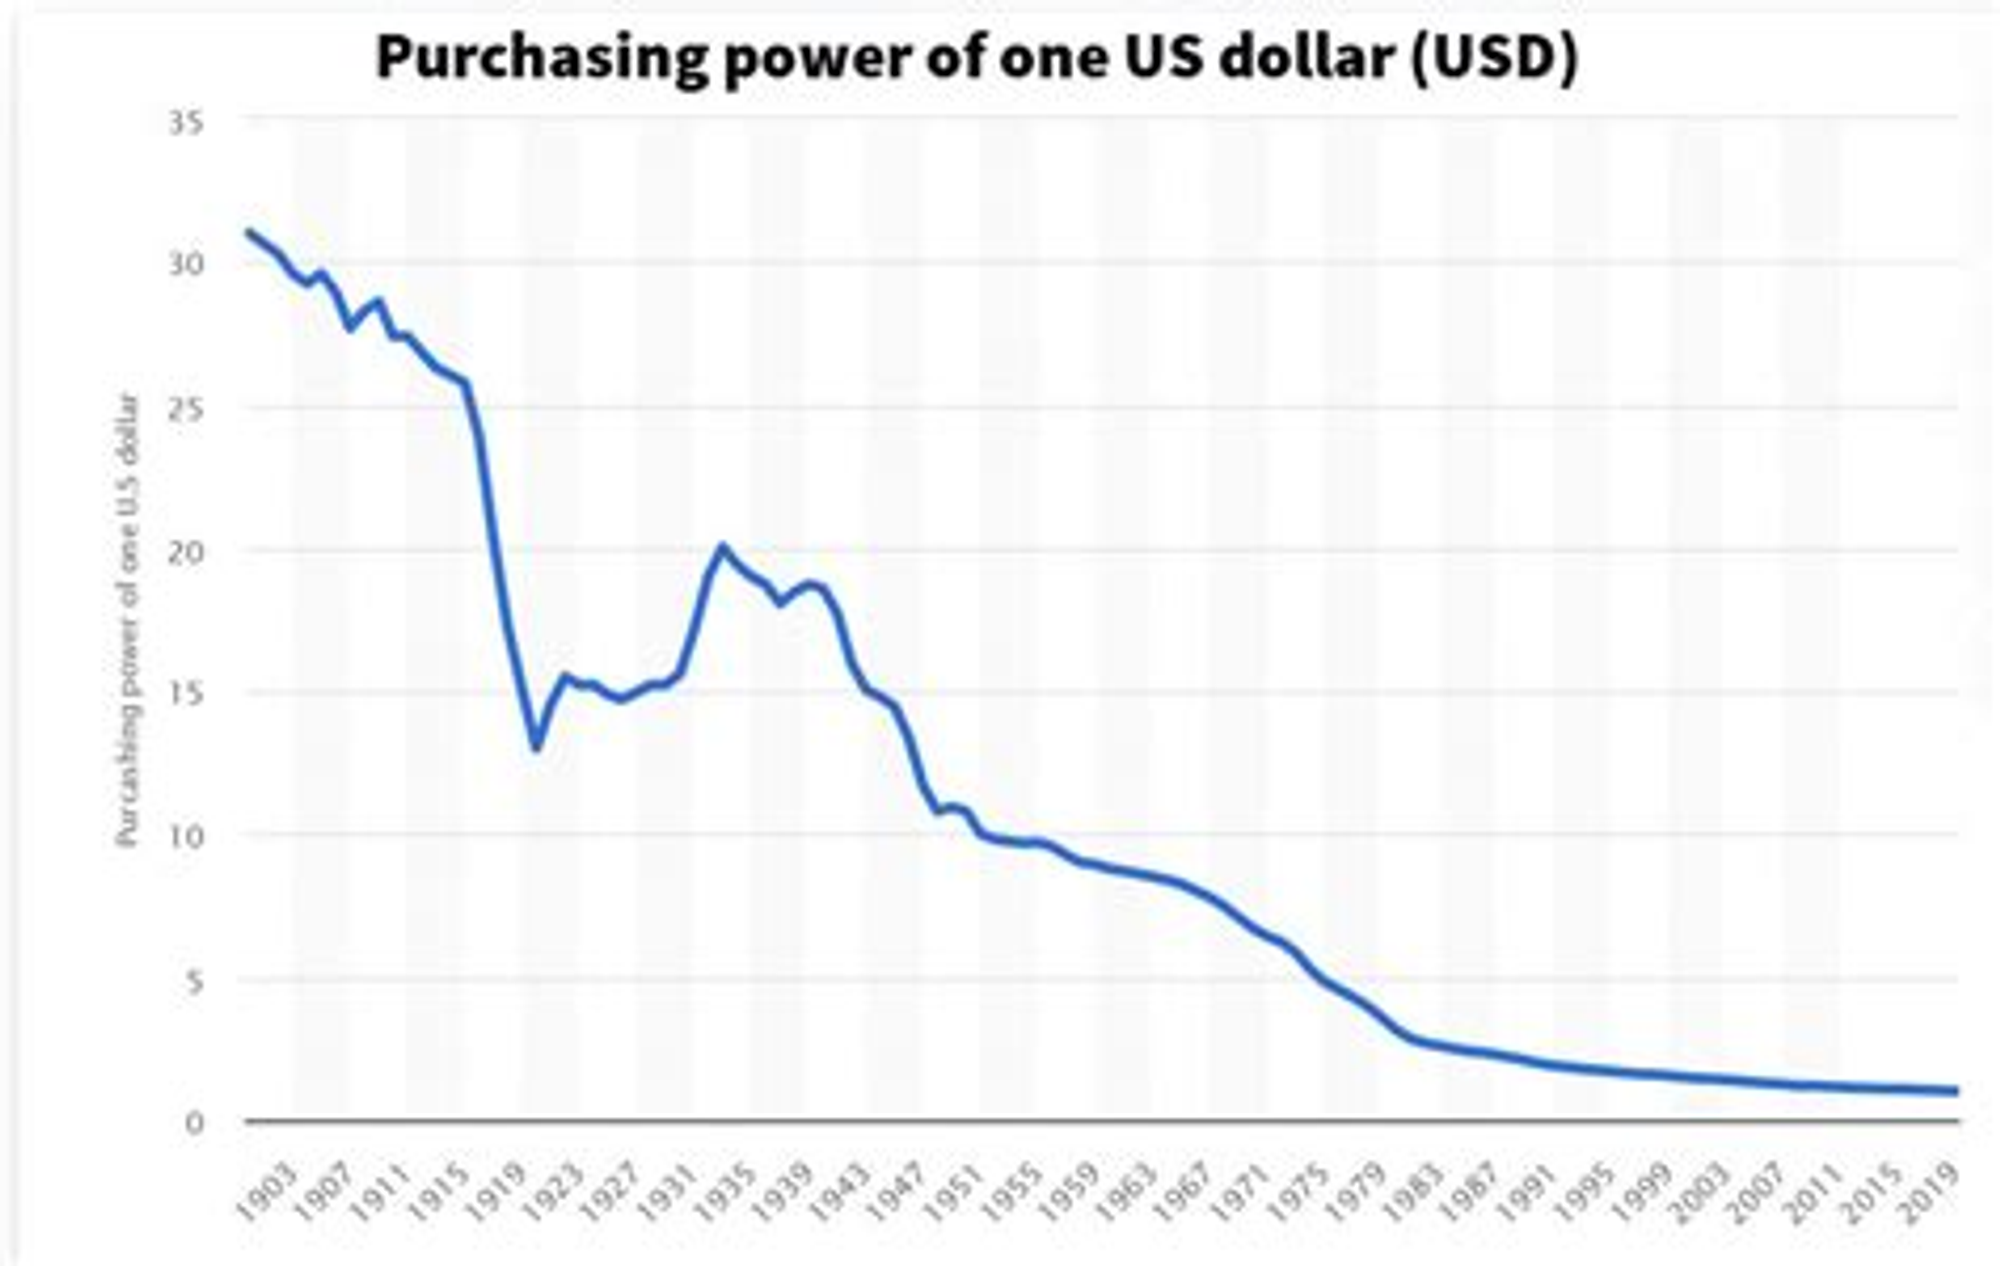 A Dollar ain't worth what it used to be! Note the US left the gold standard in the early 1970's which accelerated the decline.